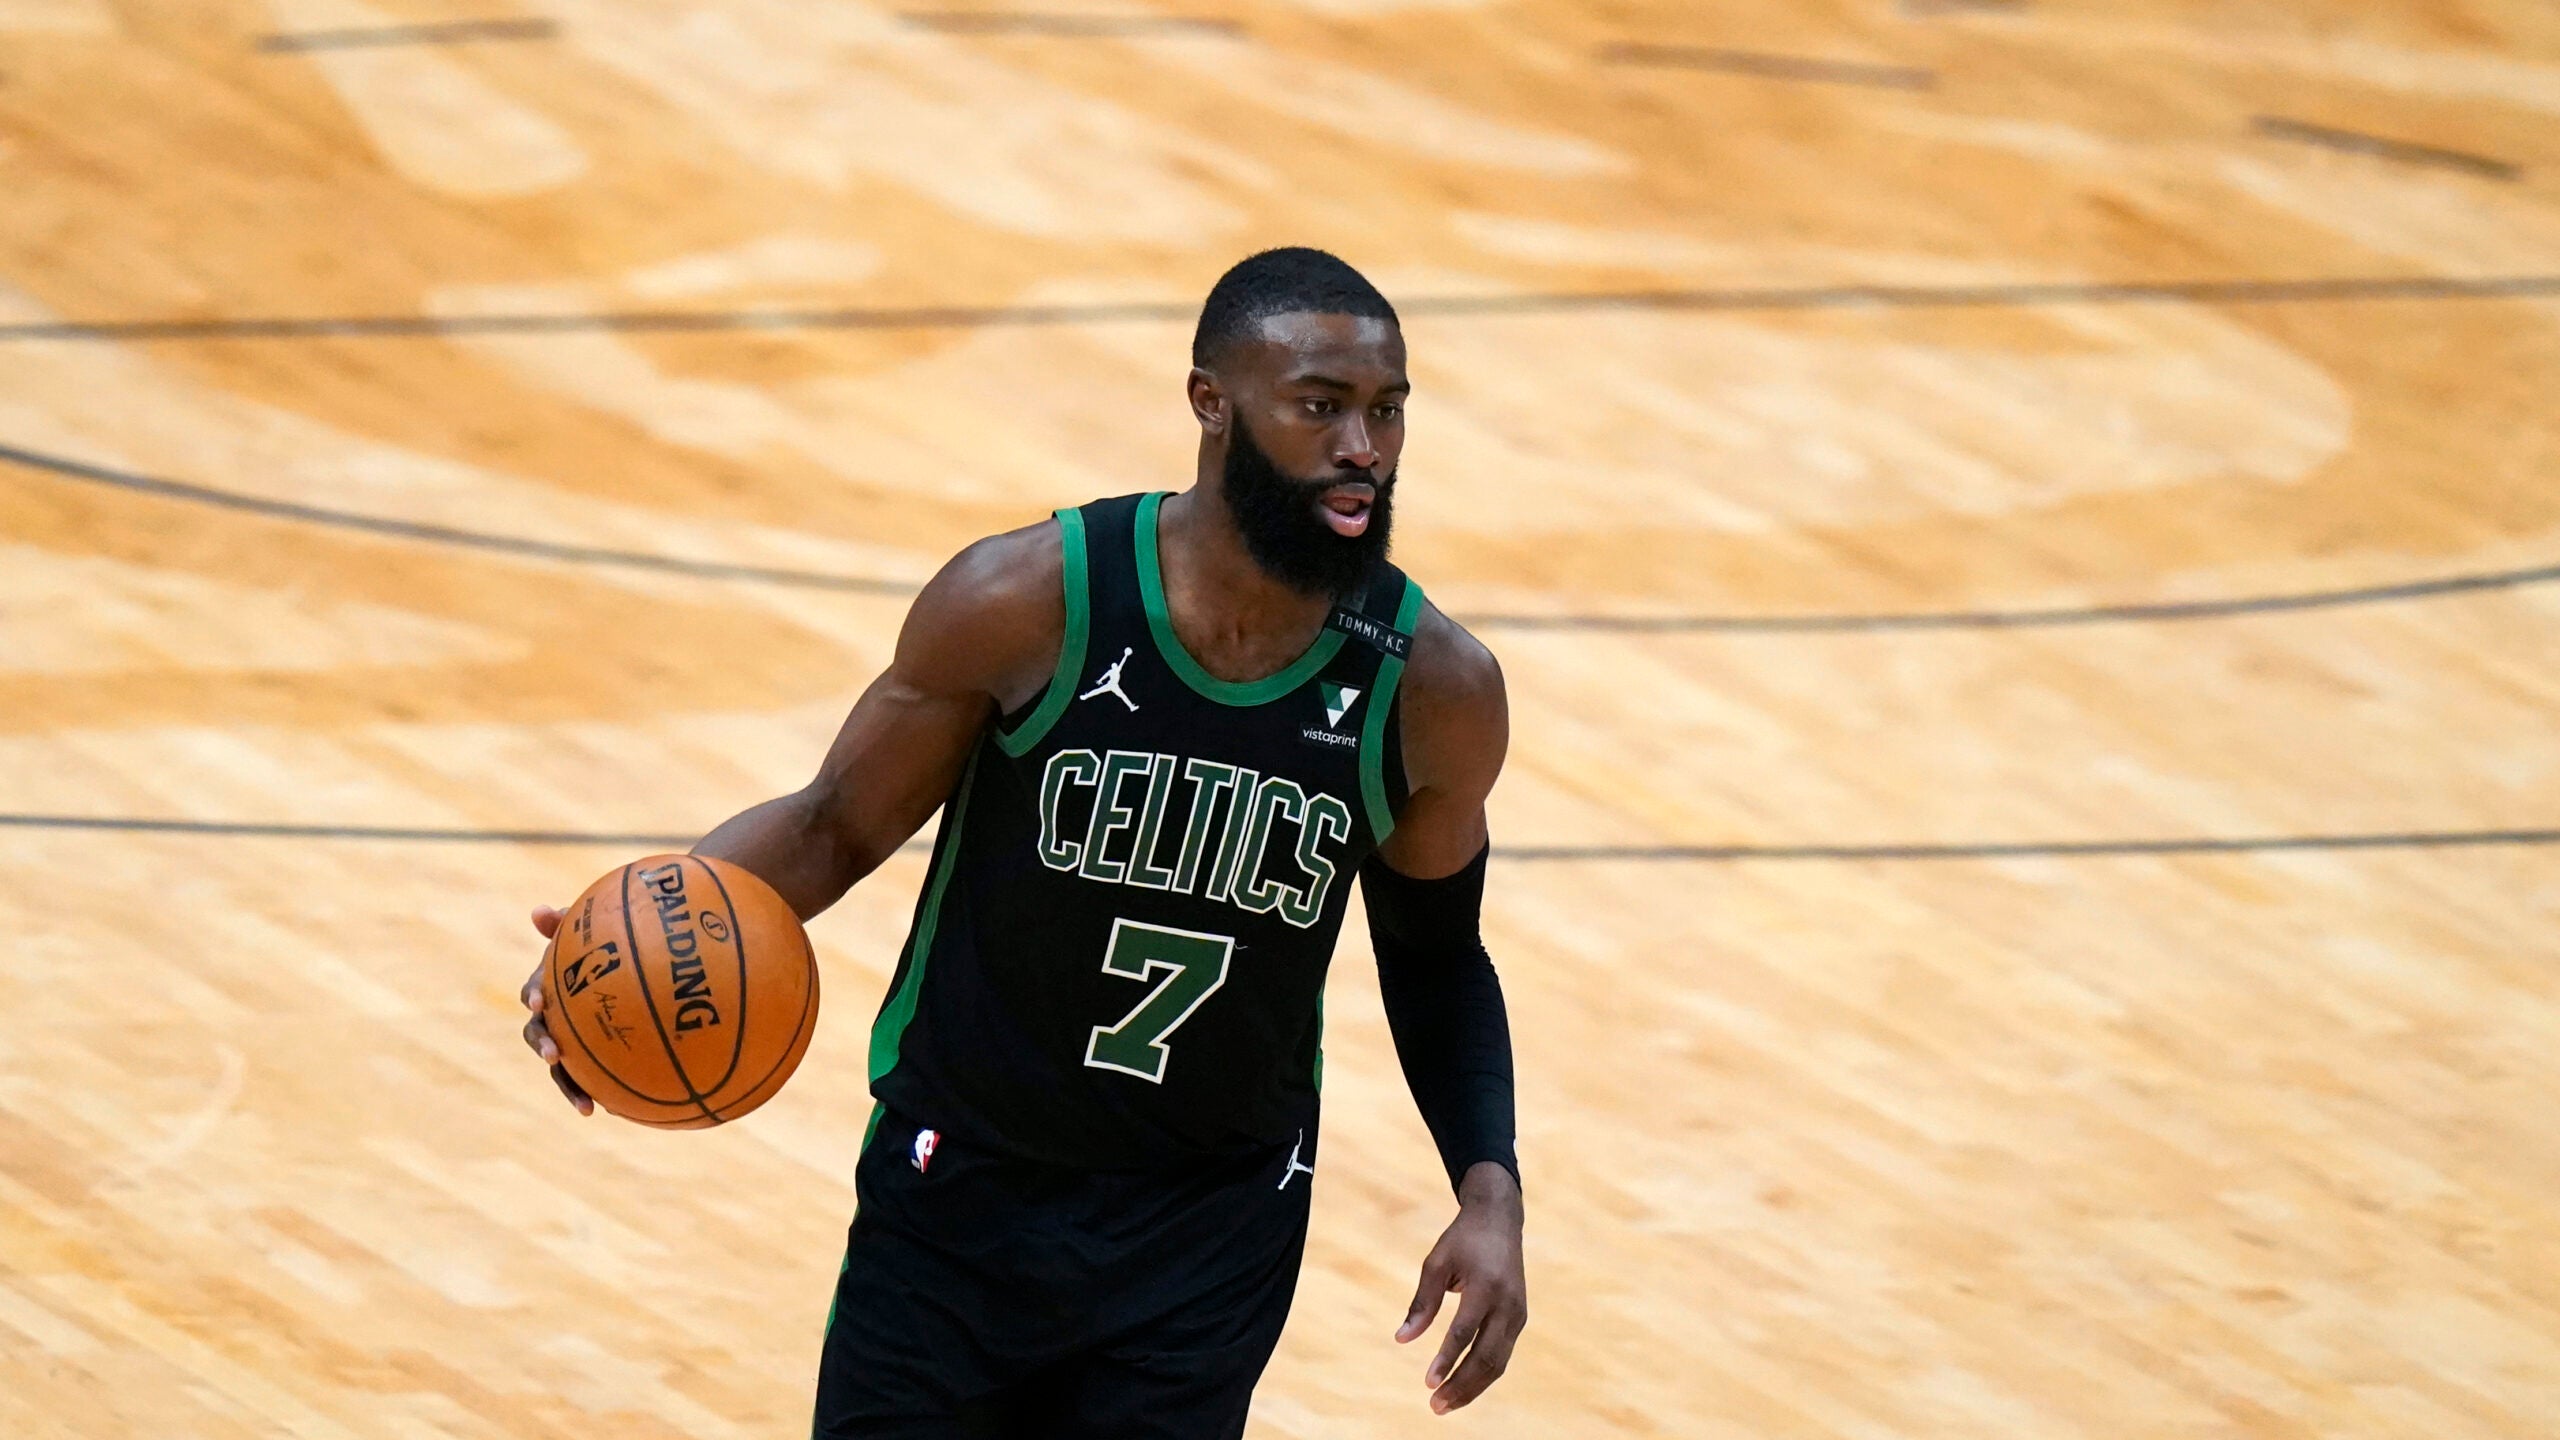 Celtics' Jaylen Brown named to his first All-Star team, while